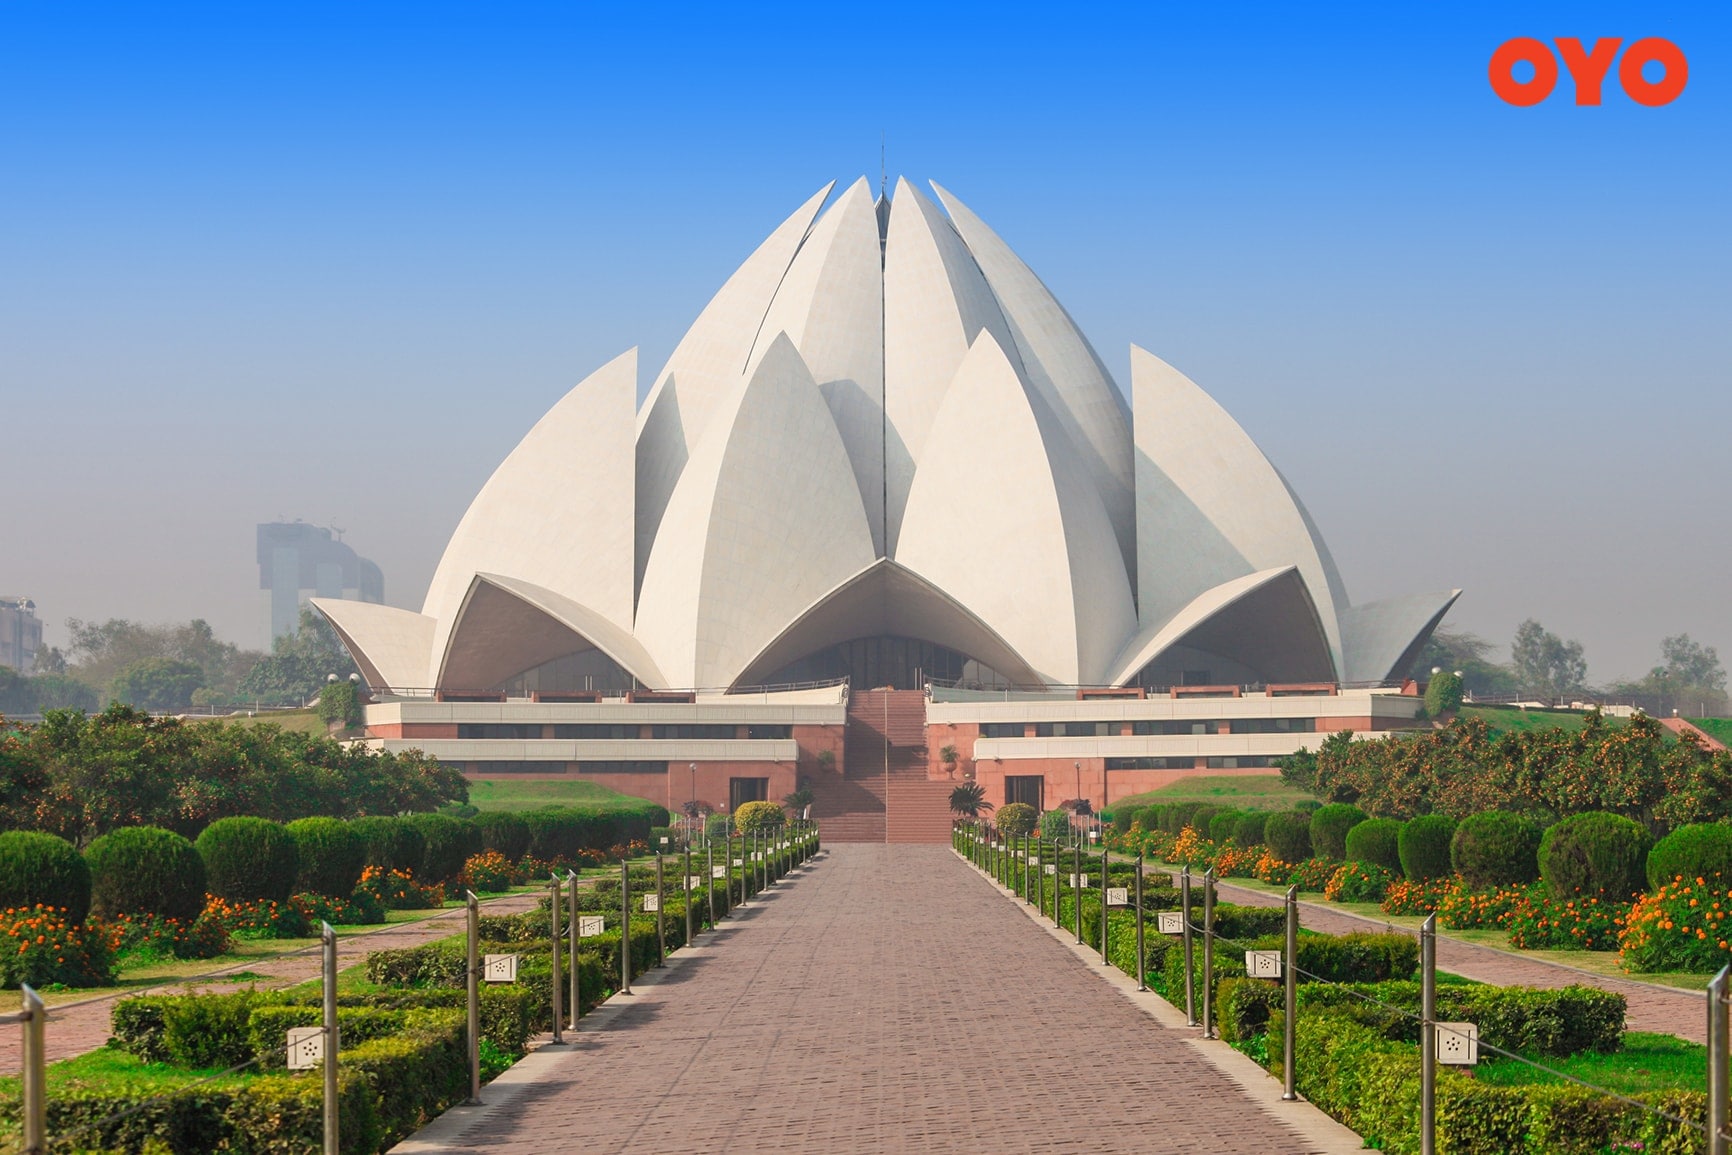 The Lotus Temple, New Delhi- One of the most famous temple of India